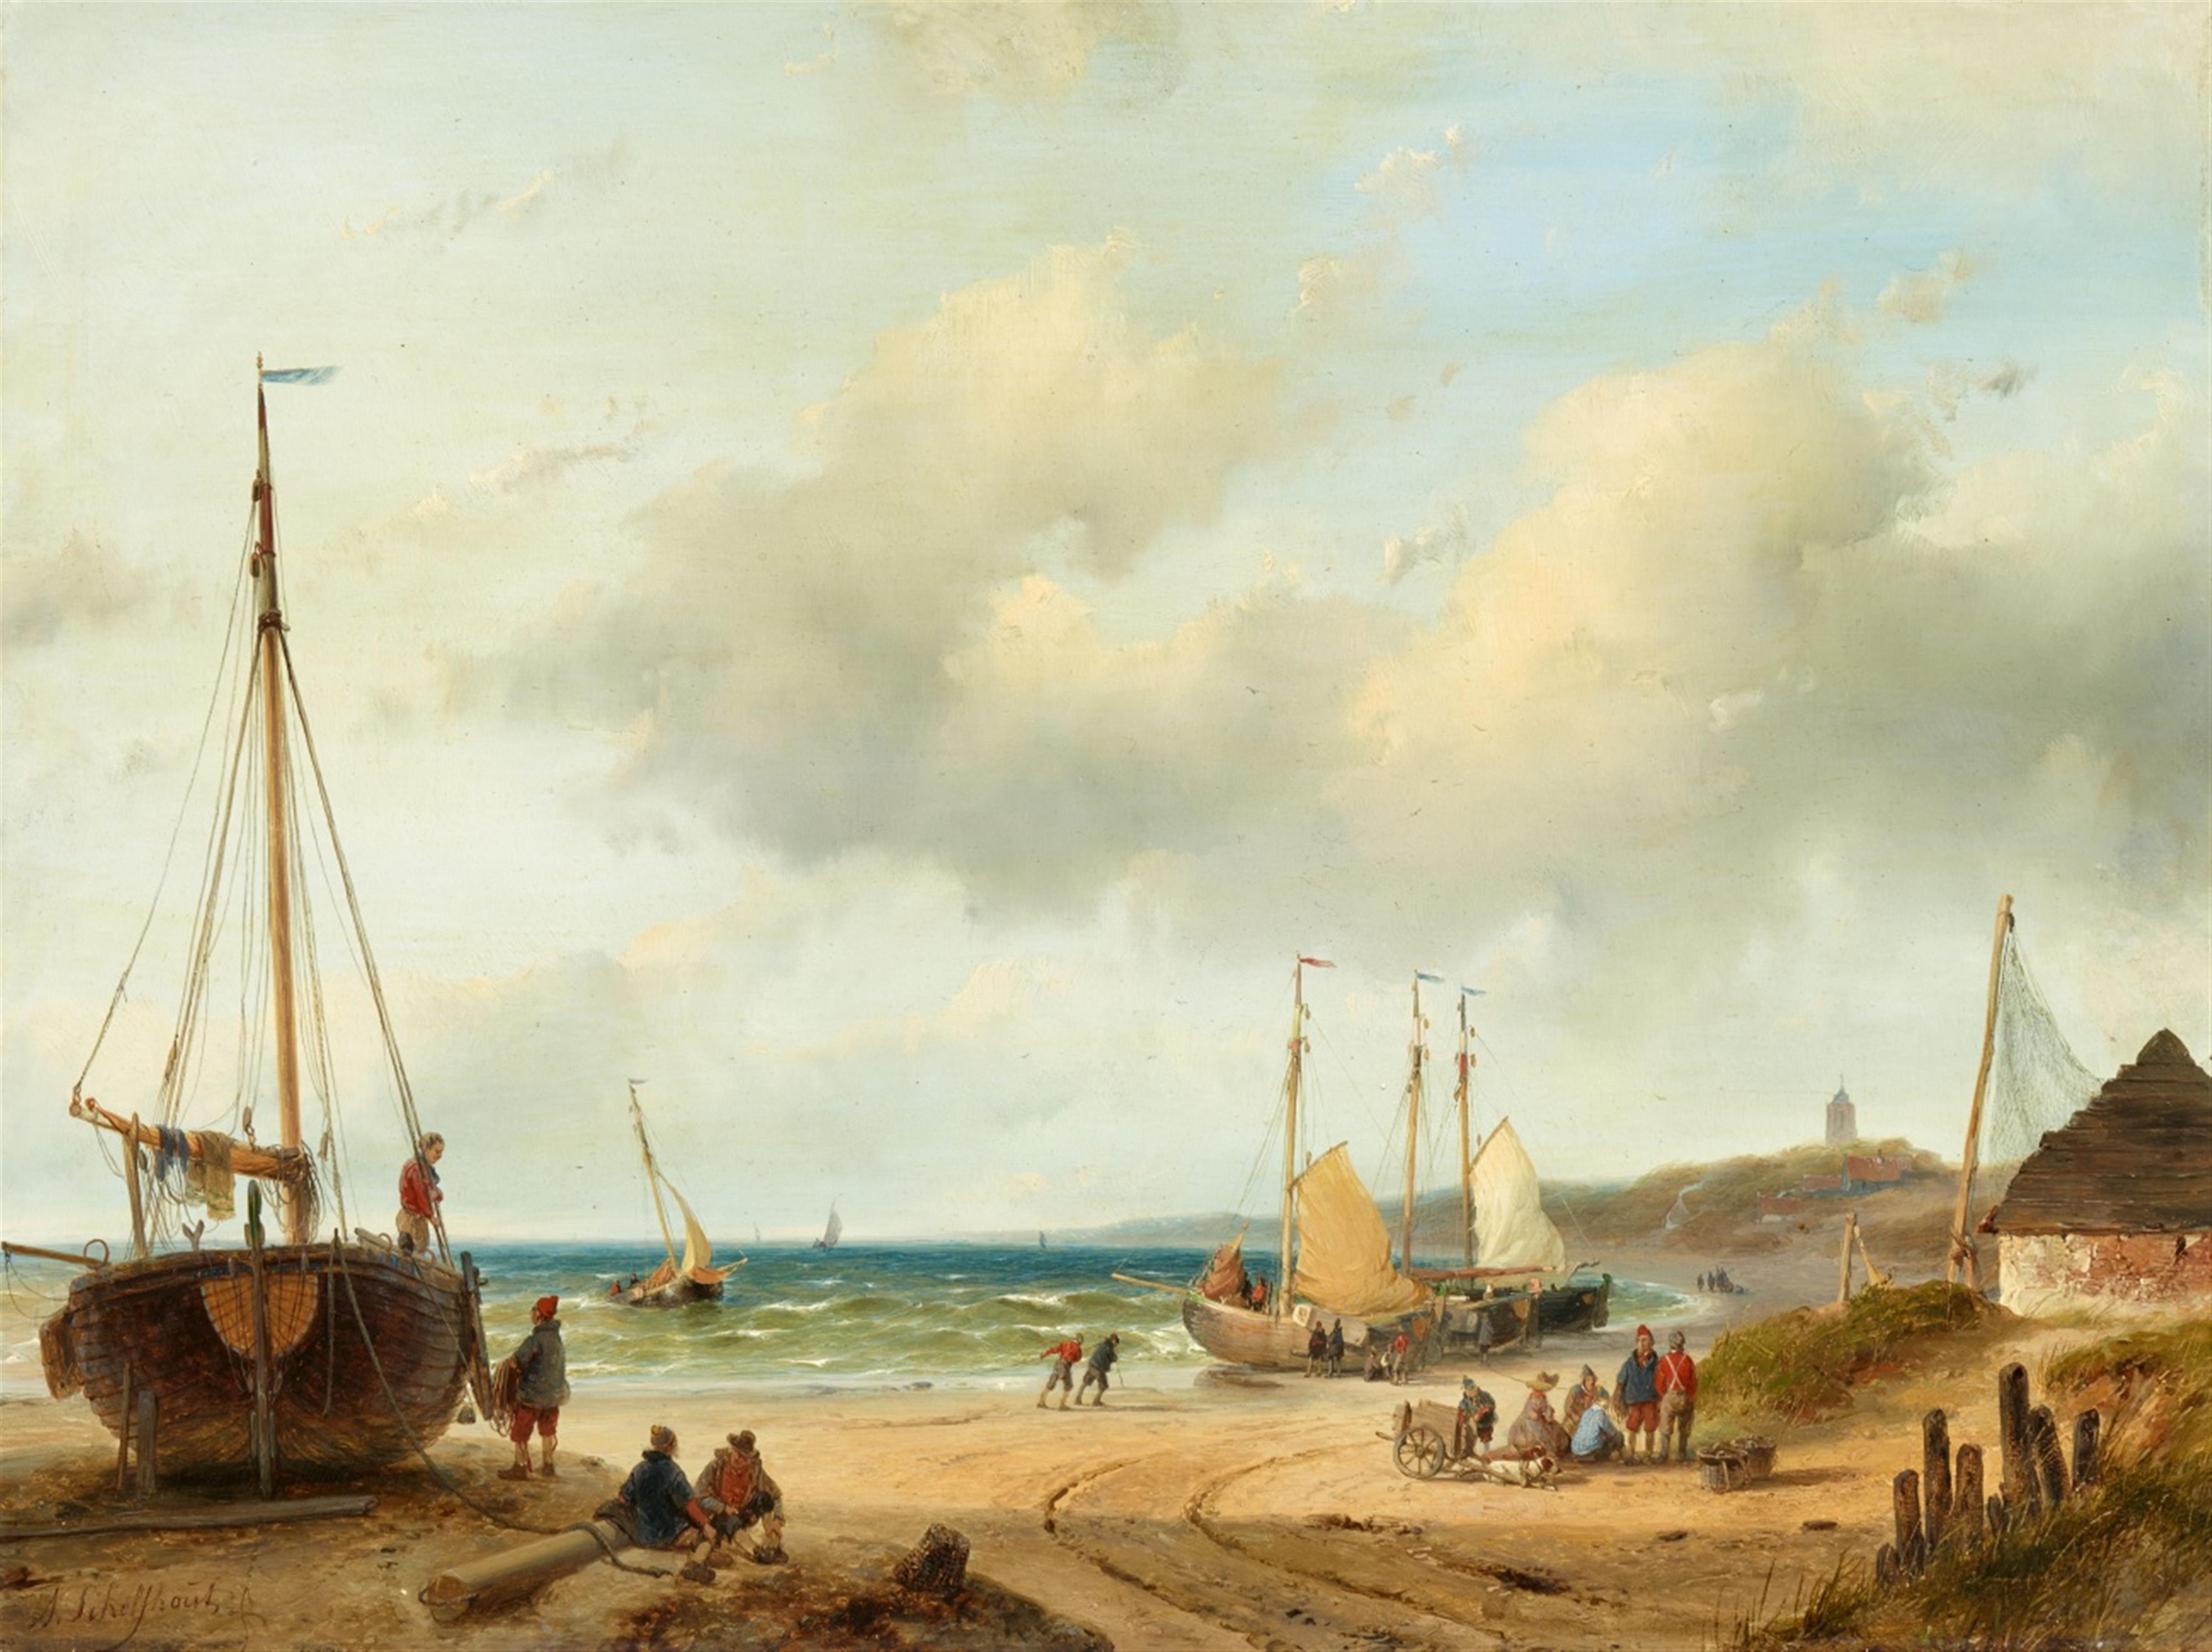 Andreas Schelfhout - Coastal Landscape with Fishermen and Heavily Laden Boats - image-1